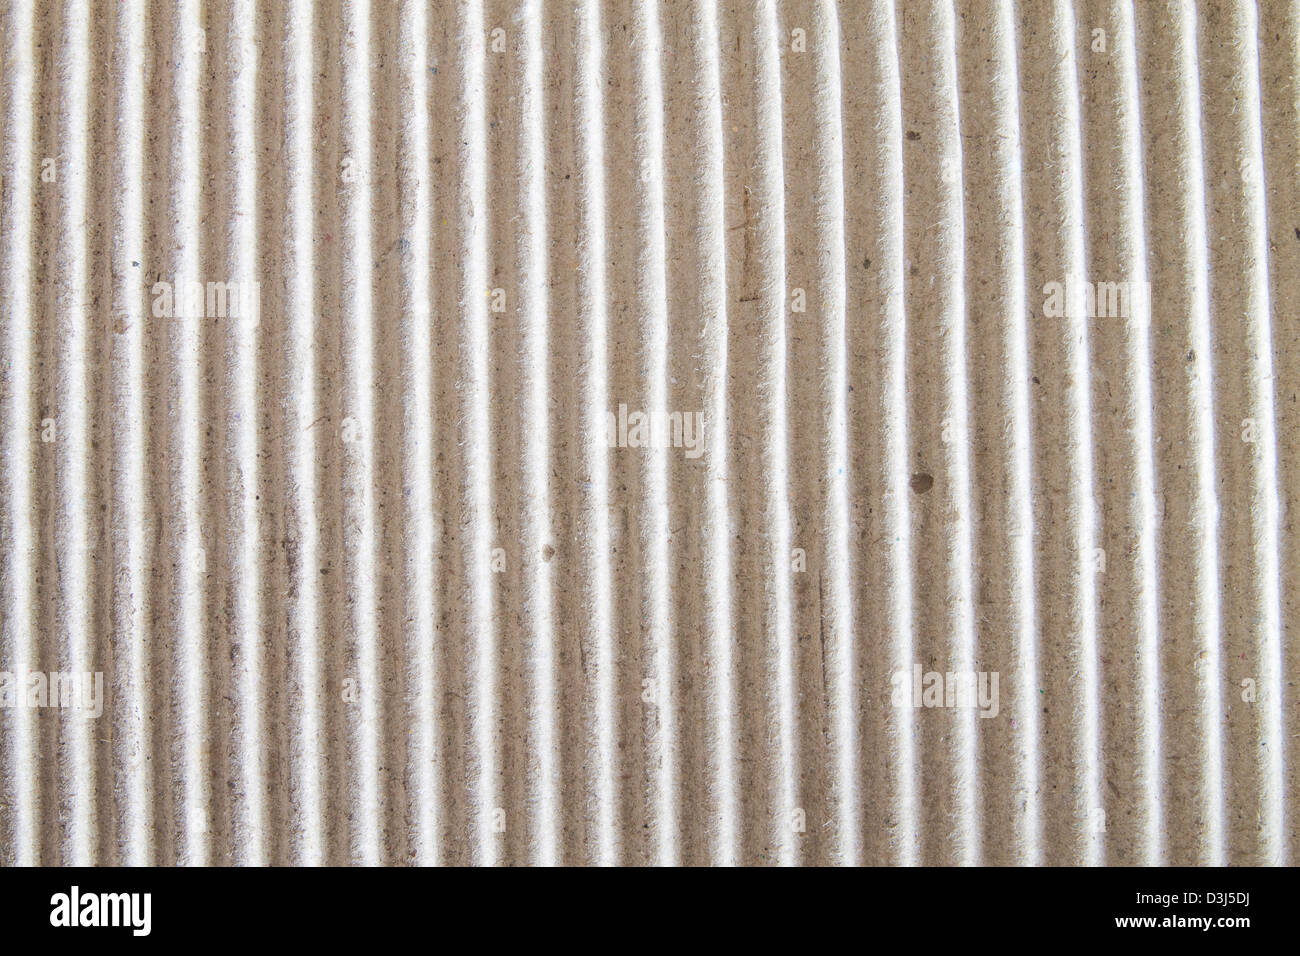 Textured corrugated striped cardboard with natural fiber parts Stock Photo